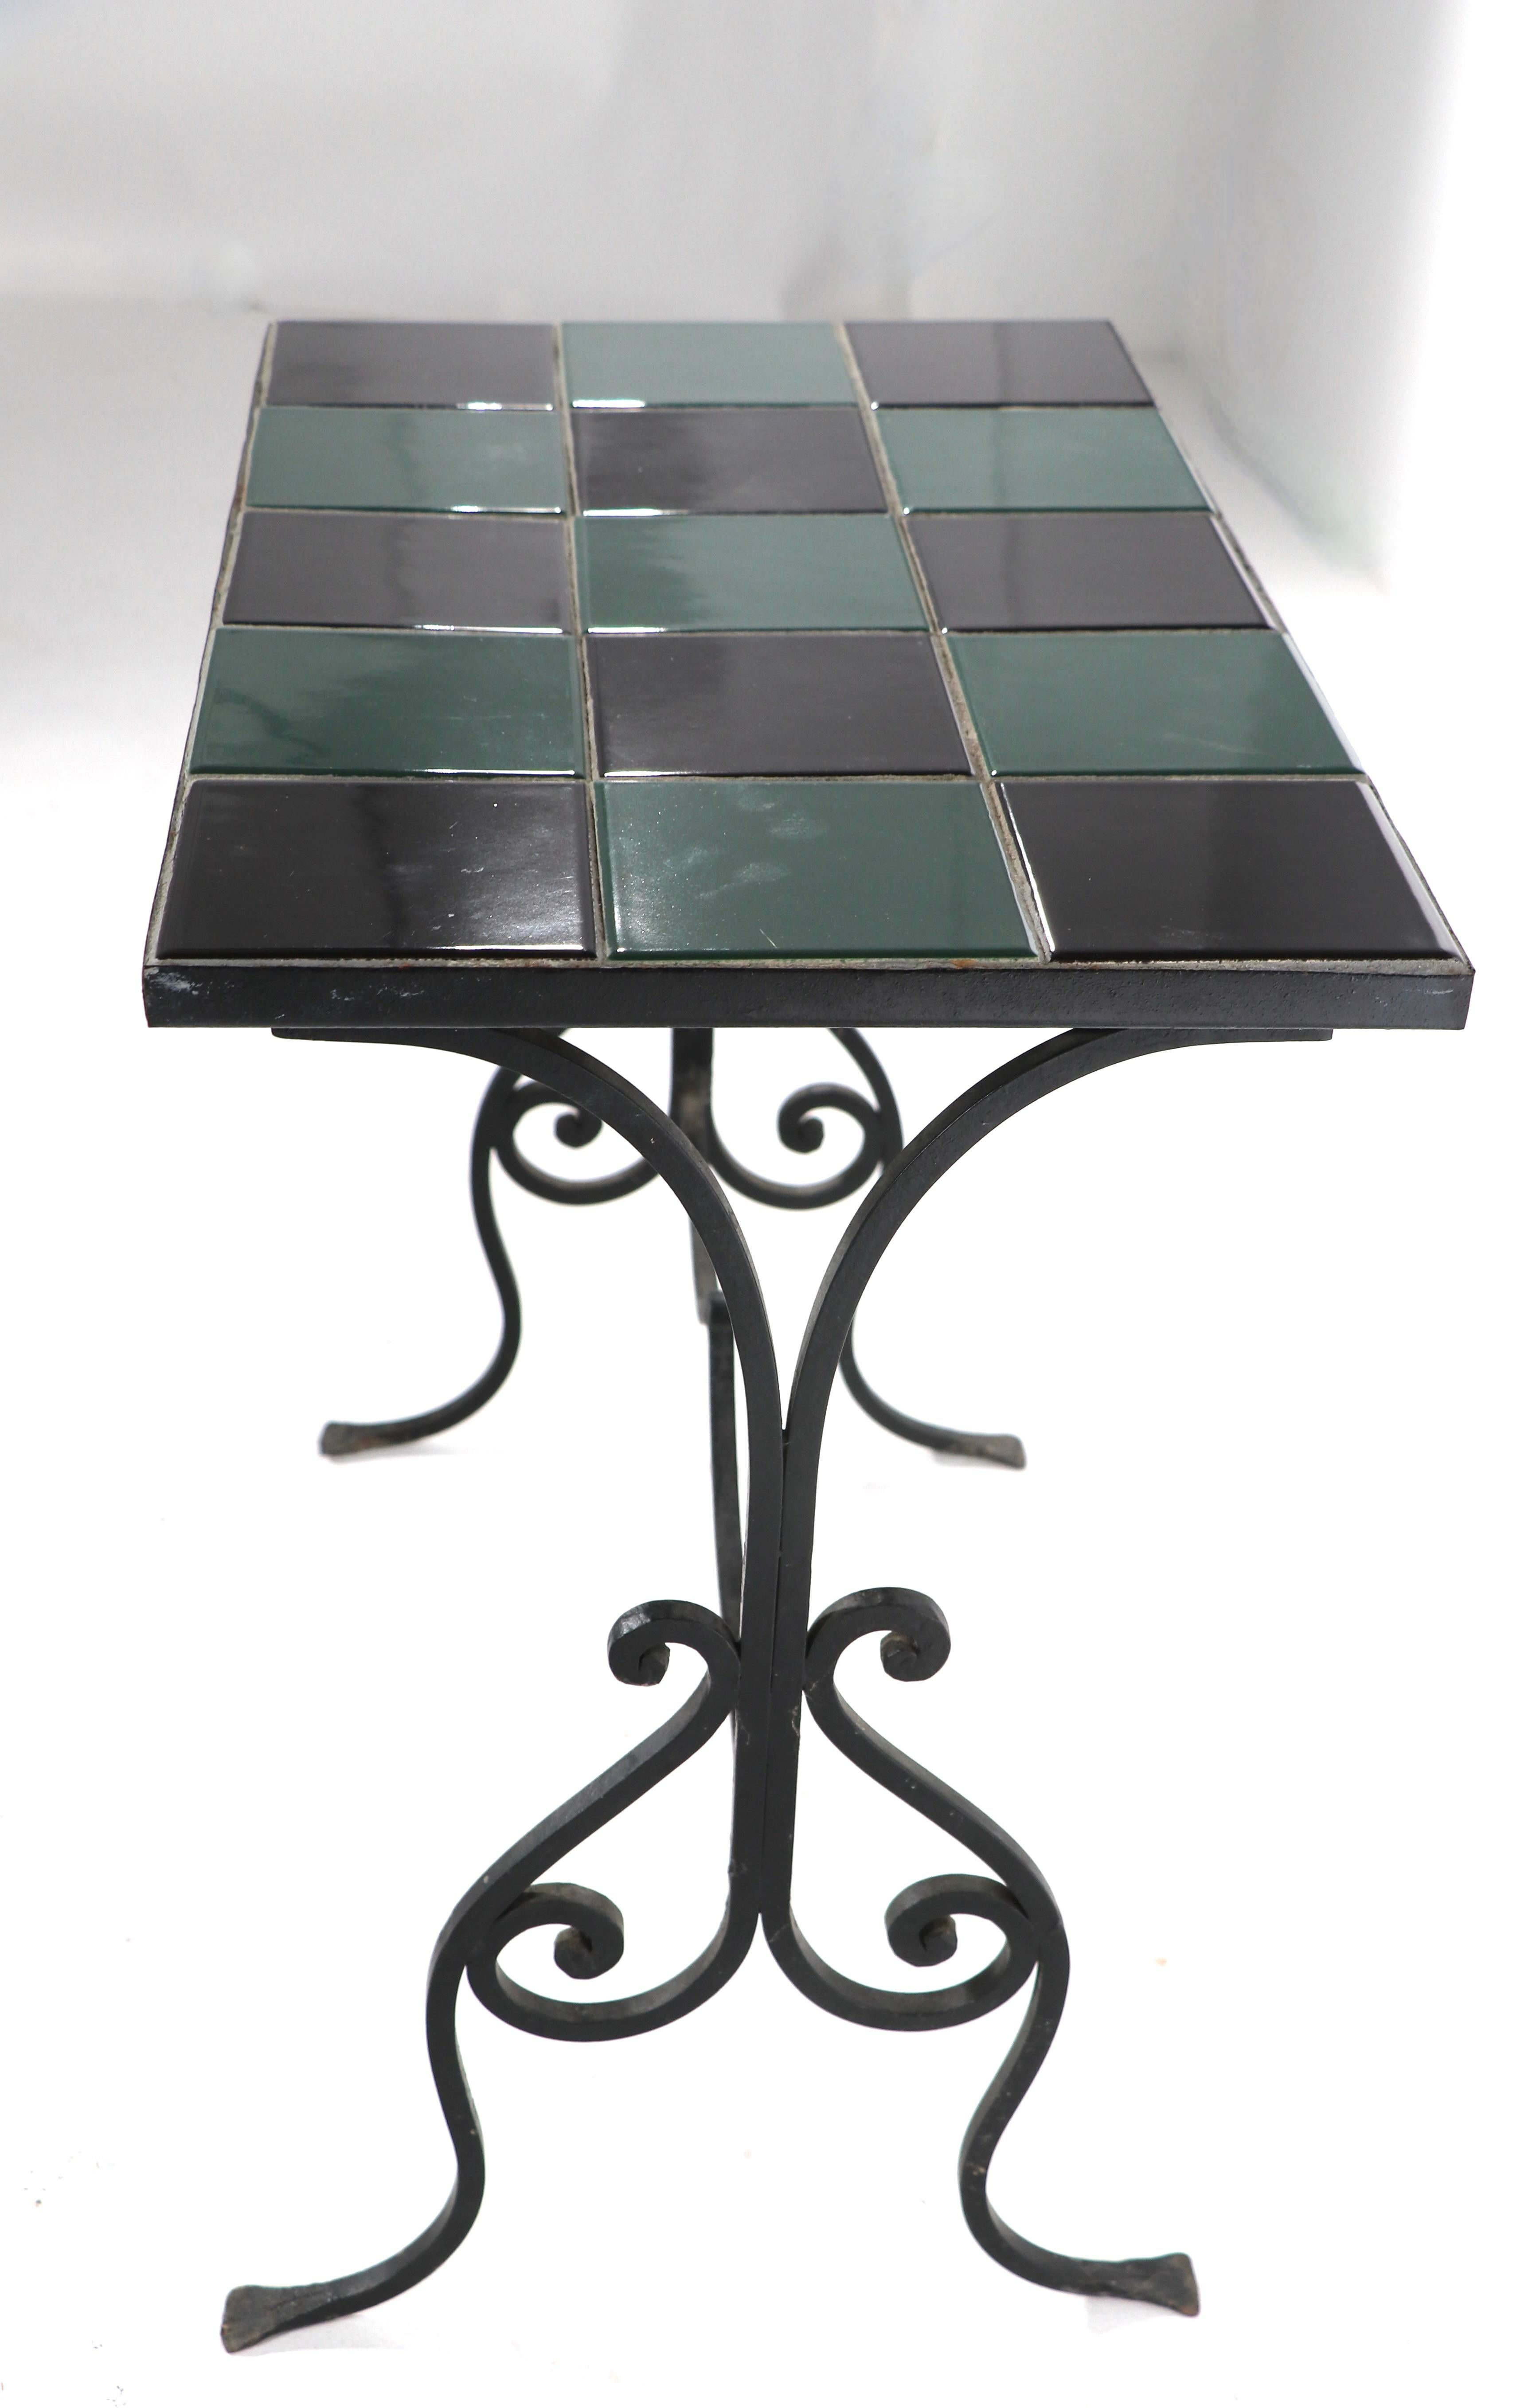 Ceramic Wrought Iron Tile Top Table